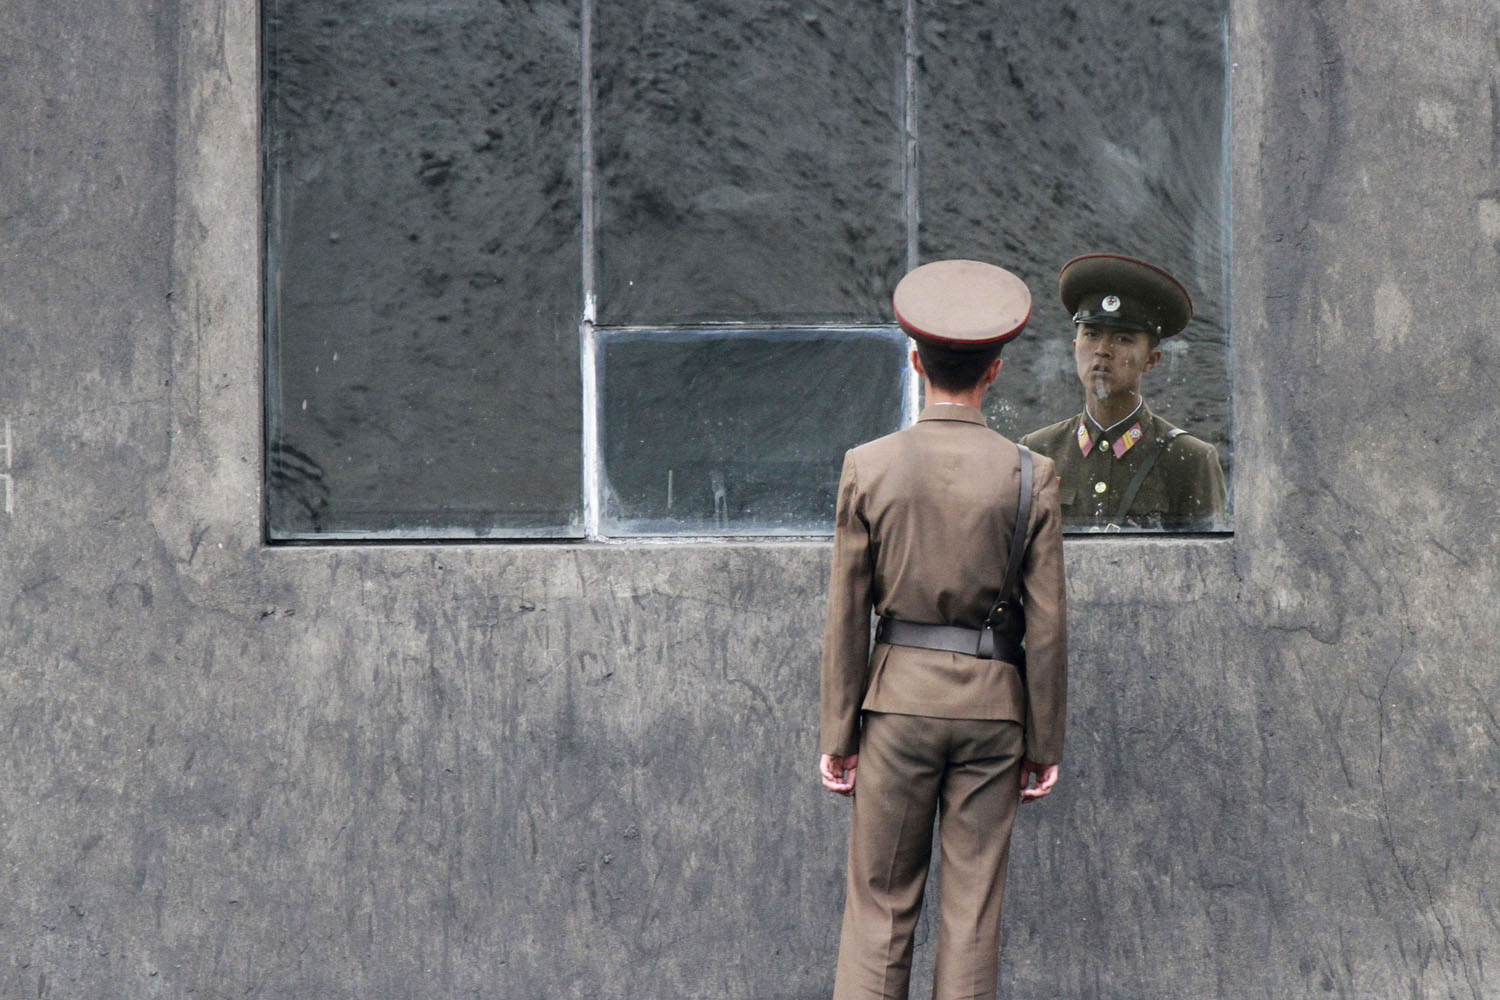 June 24, 2013. A North Korean soldier stands in front of a window along the banks of Yalu River near the North Korean town of Sinuiju, opposite the Chinese border city of Dandong.